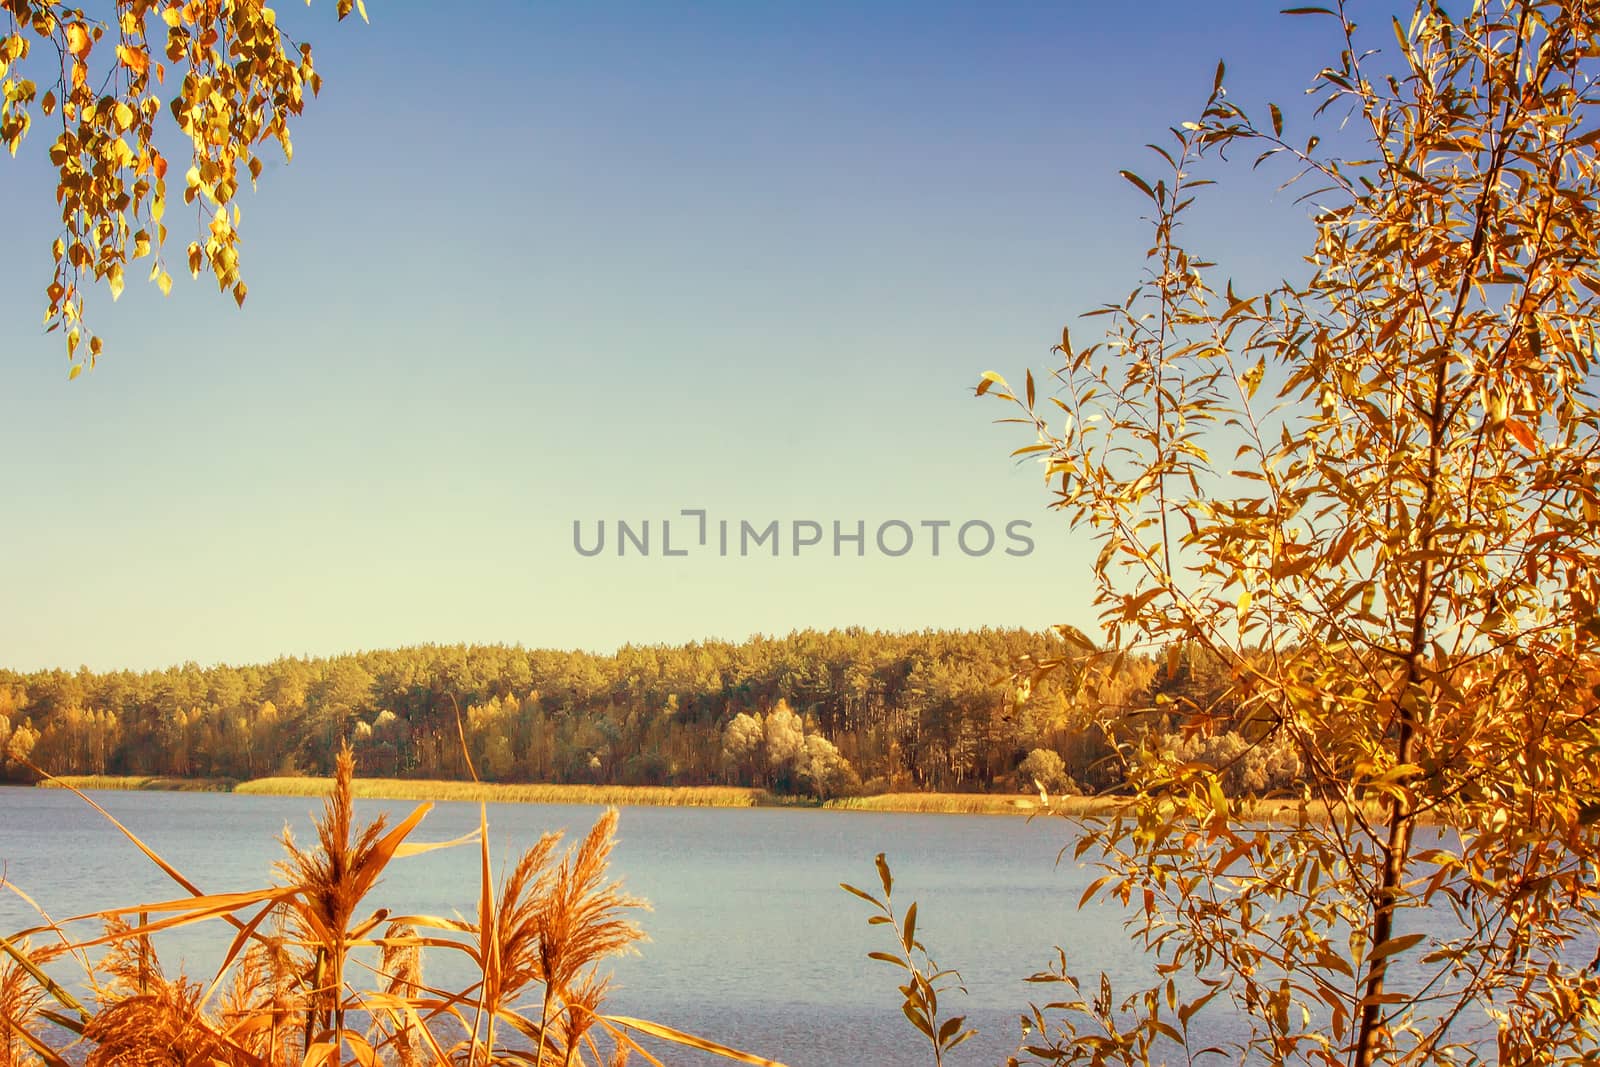 On the shore of a large lake with trees with yellow leaves. The crowns of trees reflected in the water.